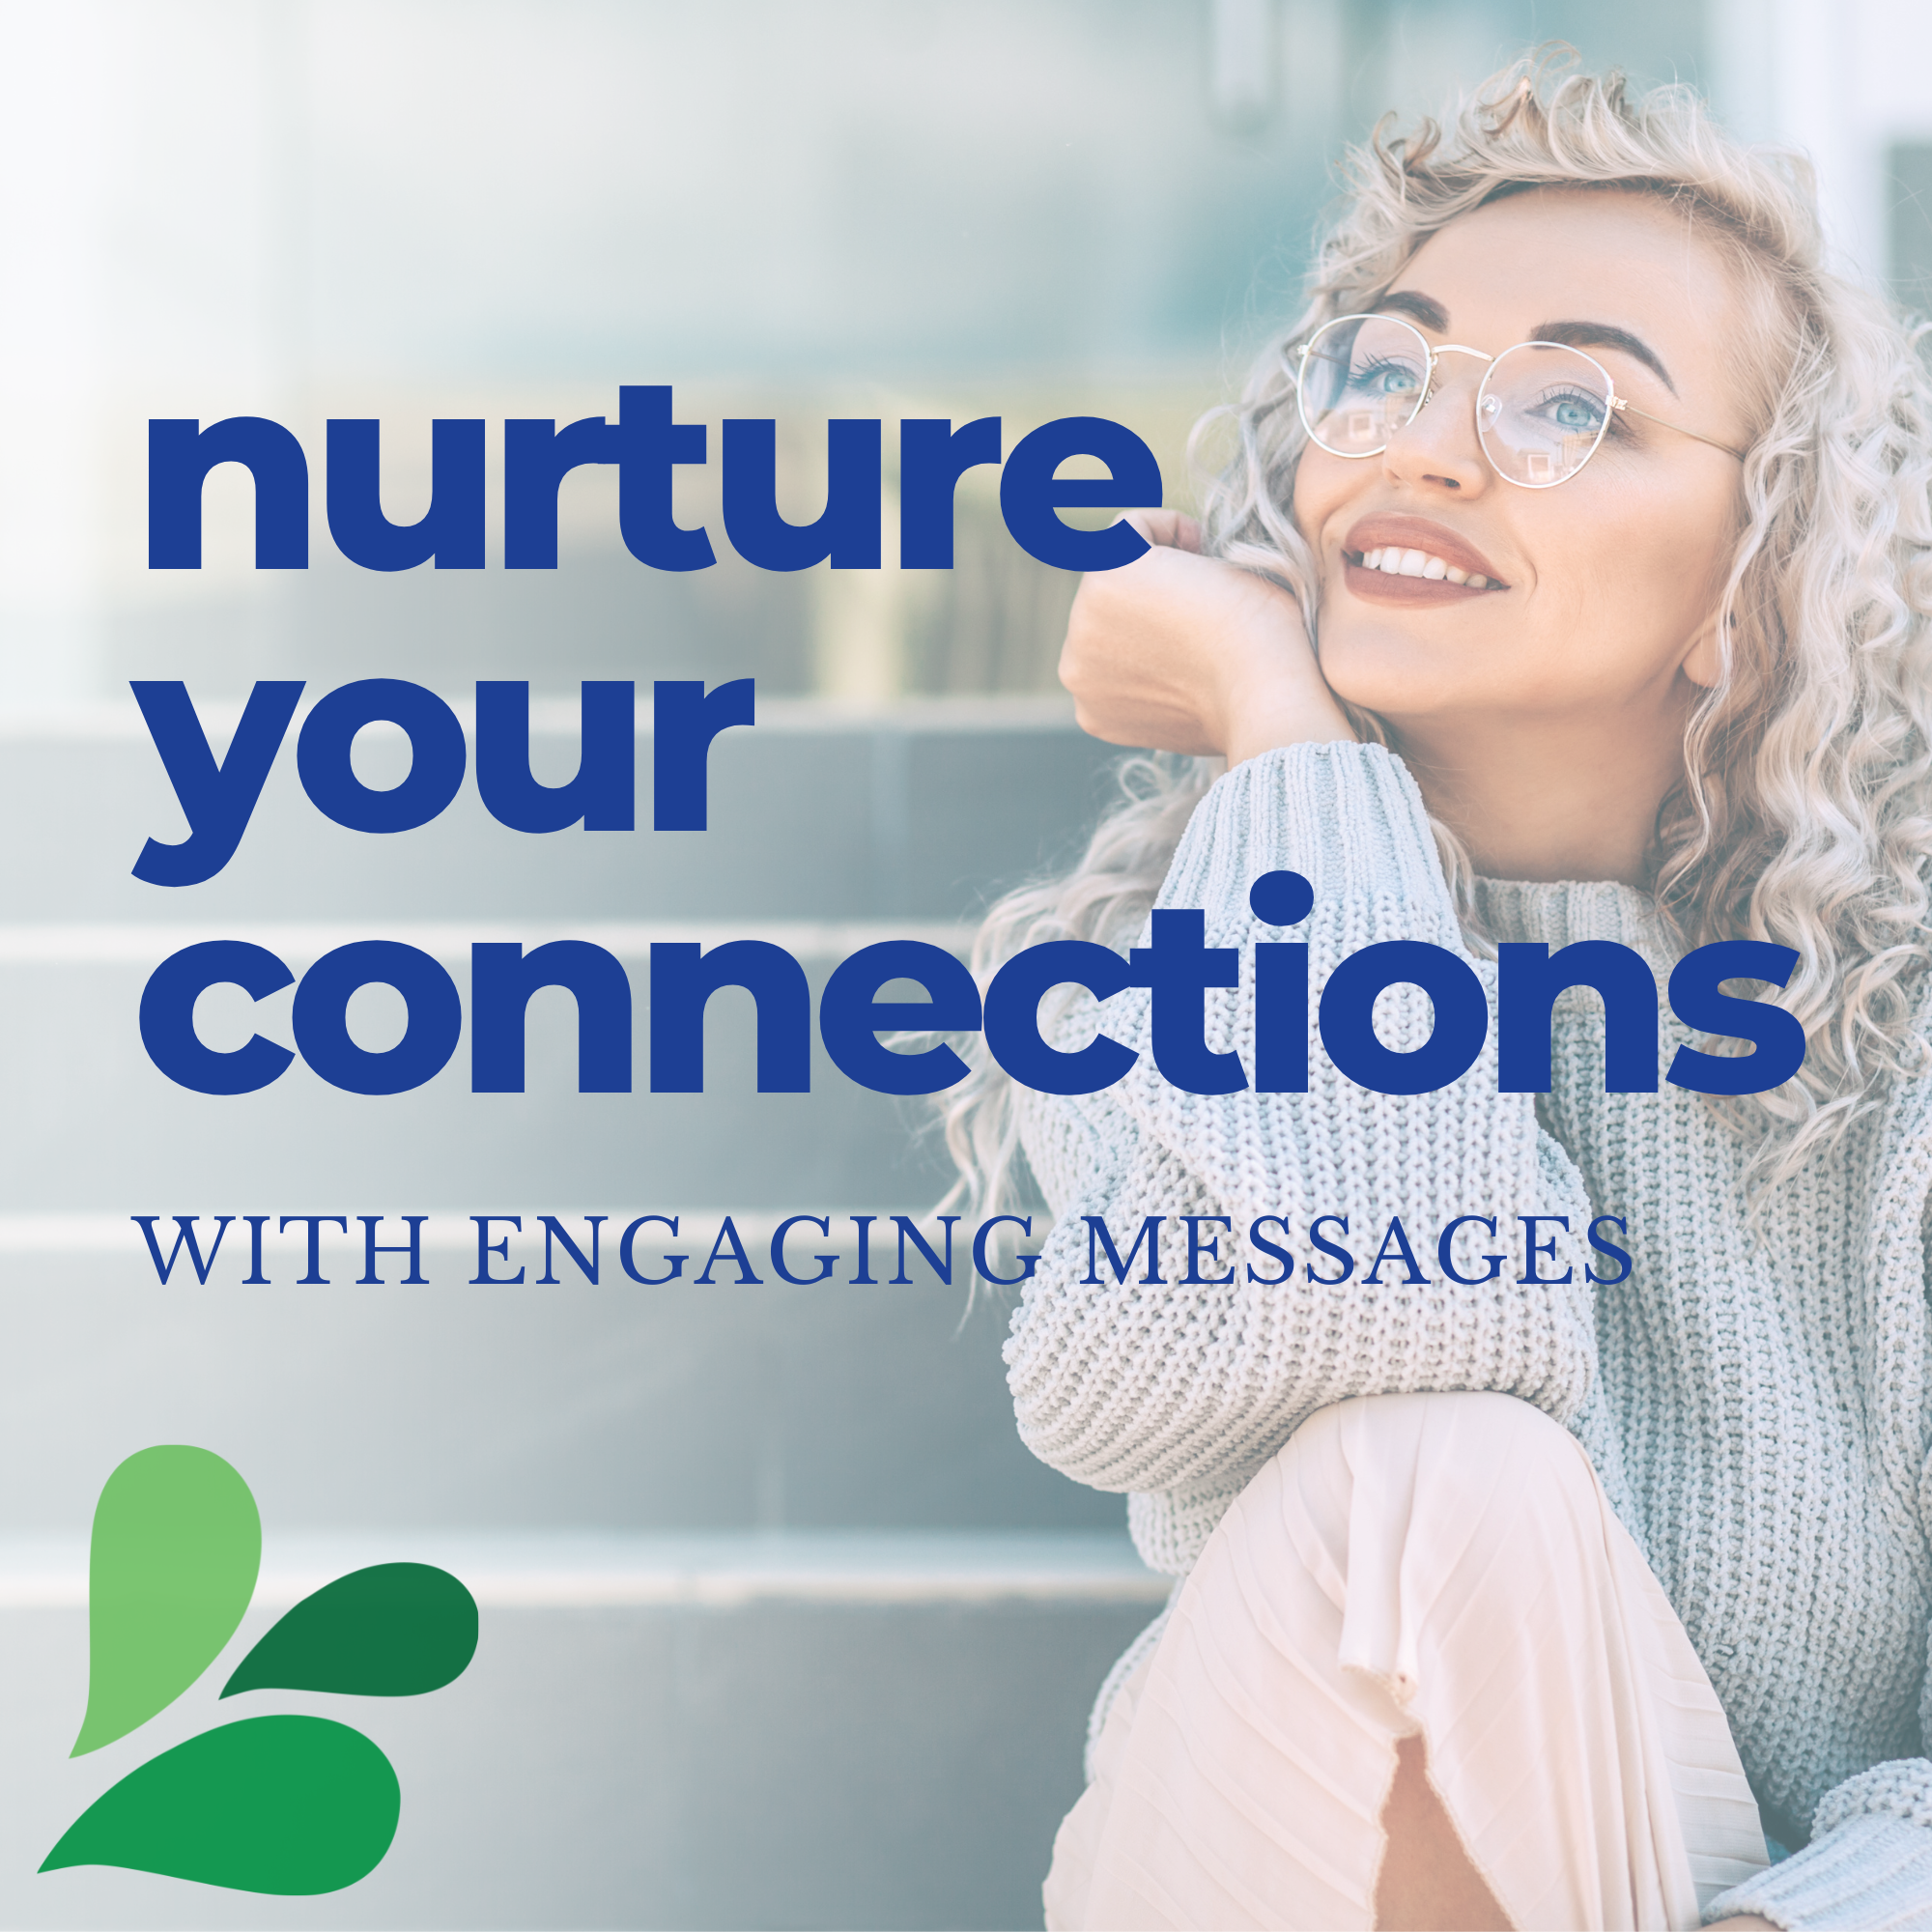 woman sitting on steps smiling with text overlay of nurture your connections with engaging messages and Robb Digital logo